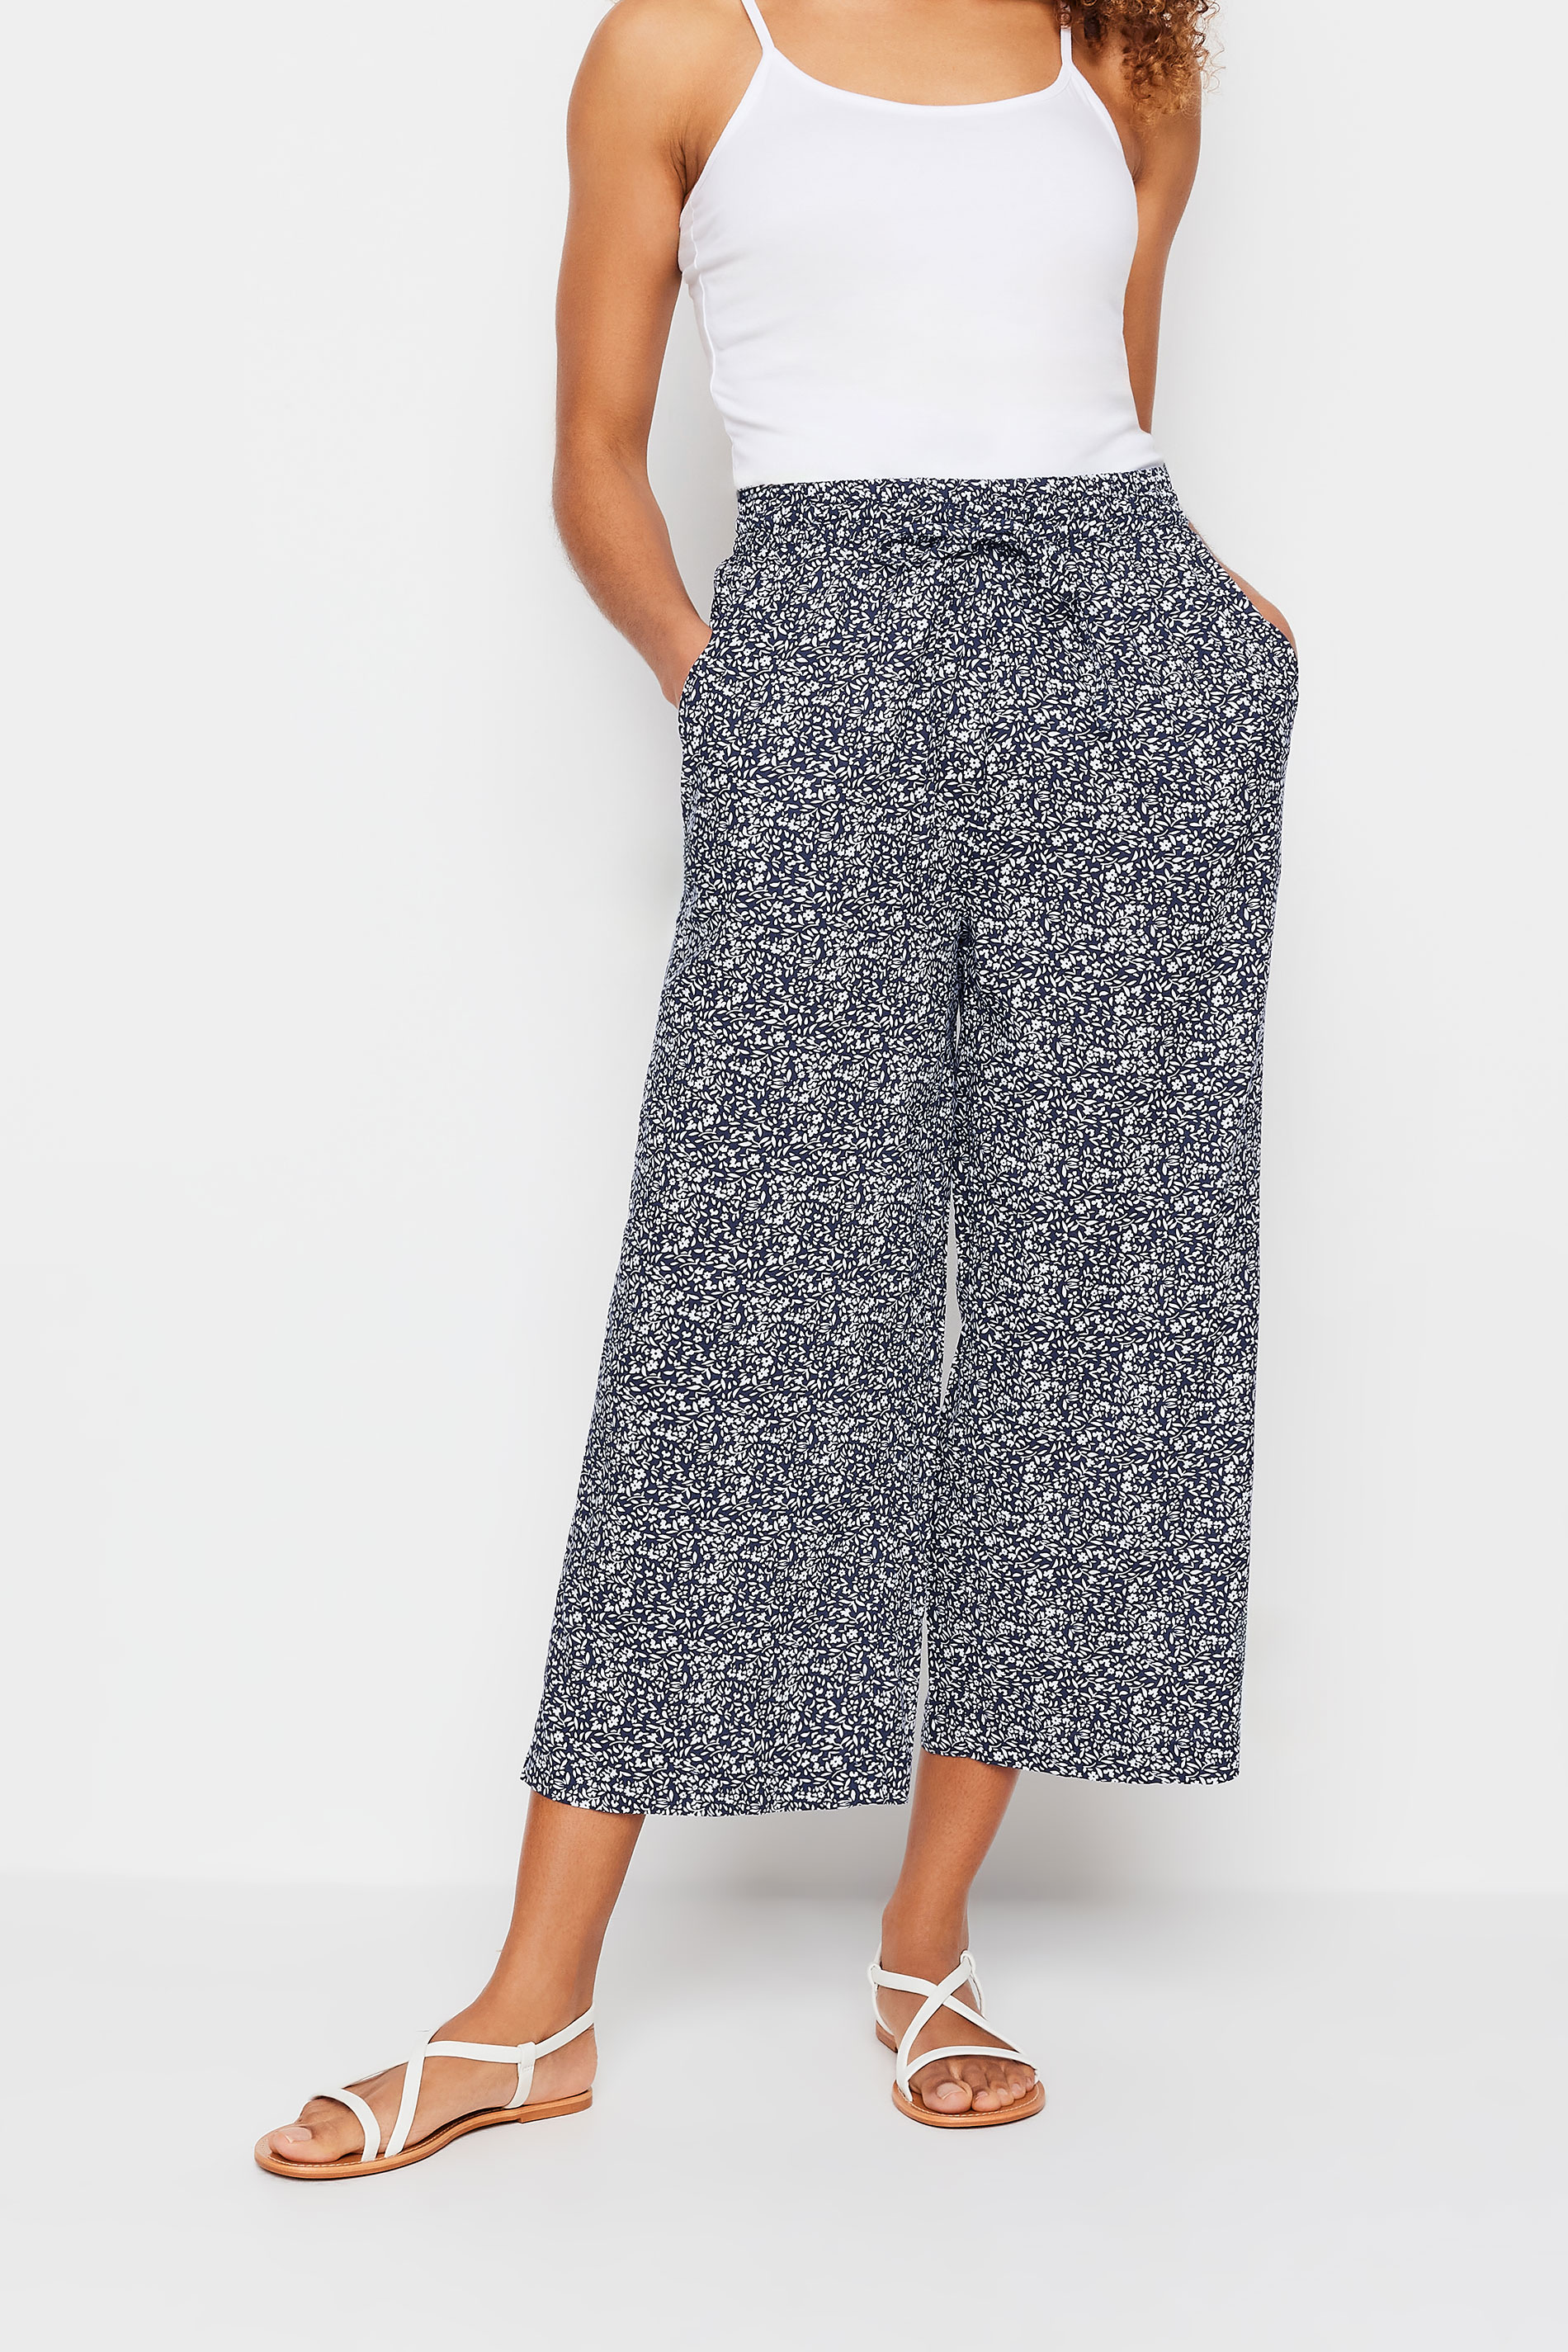 M&Co Navy Blue Ditsy Floral Culottes | M&Co 2